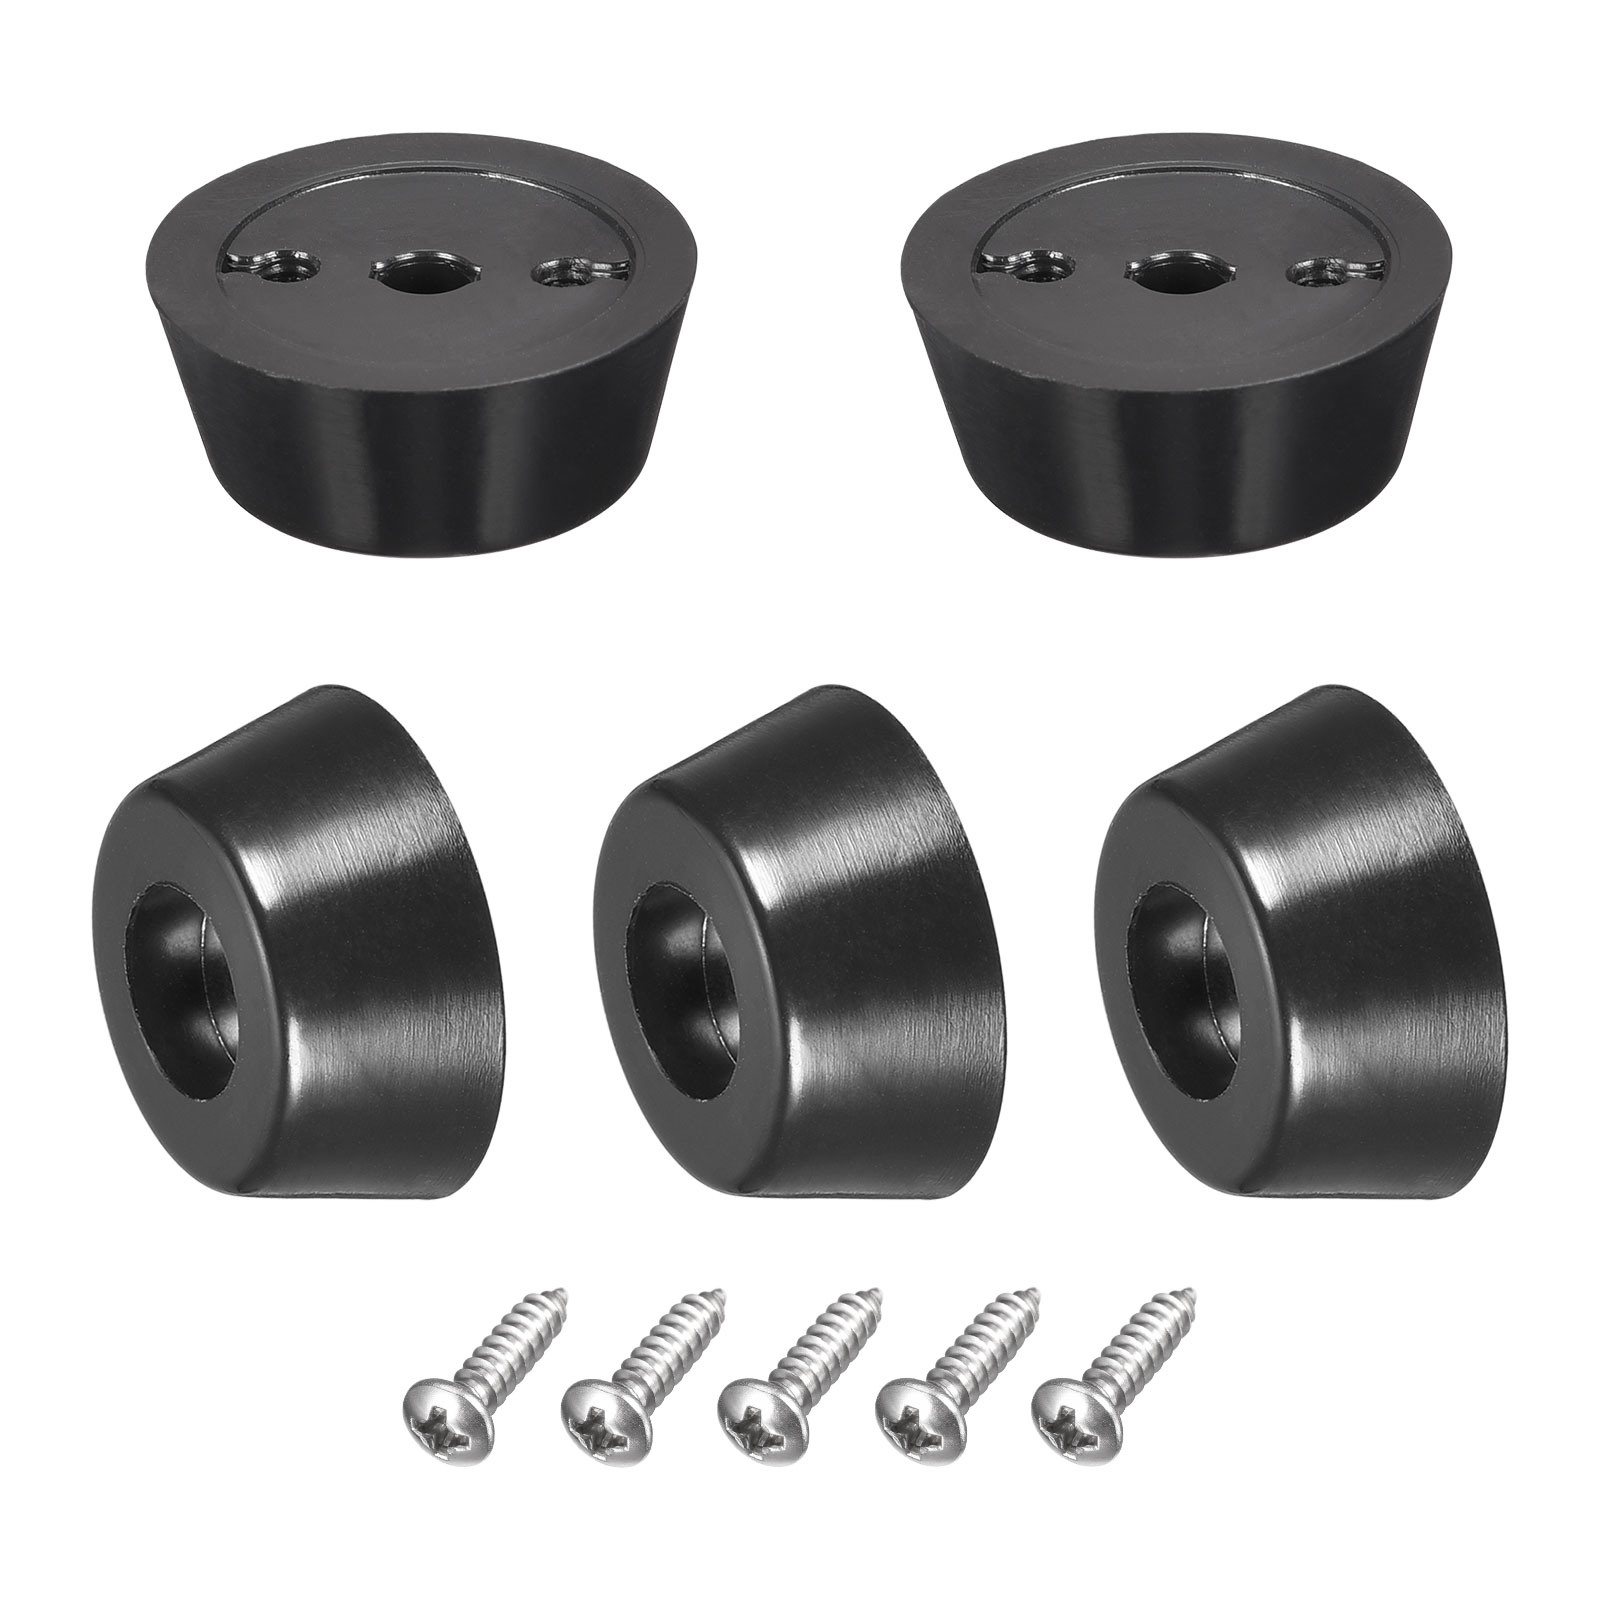 Uxcell 20mm W x 8mm H Rubber Bumper Feet, Stainless Steel Screws and Washer 20 Pack - image 1 of 5